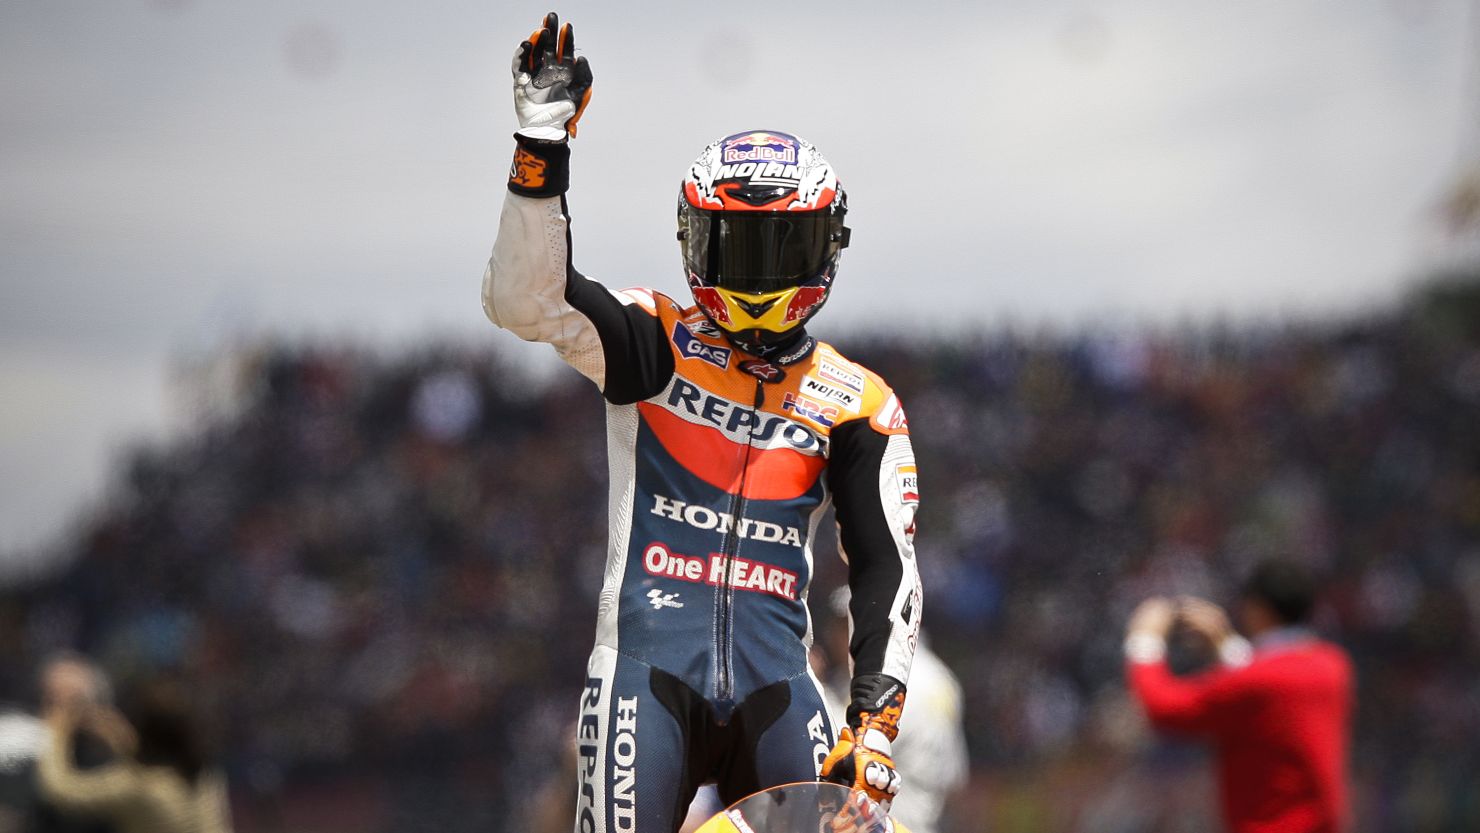 Casey Stoner wins the Portuguese MotoGP, the first time he's won at Estoril